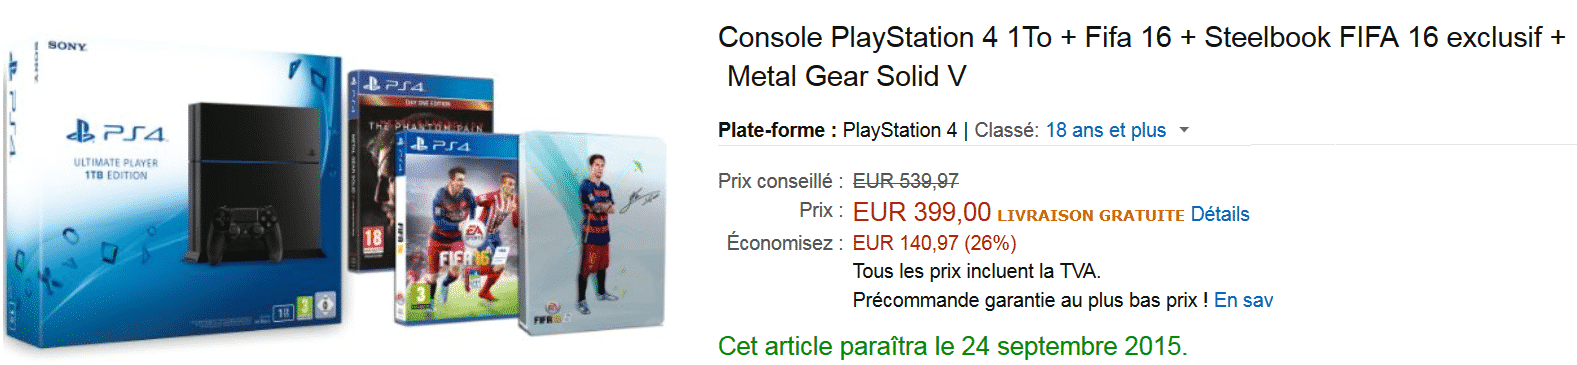 pack-ps4-metal-gear-fifa-amazon